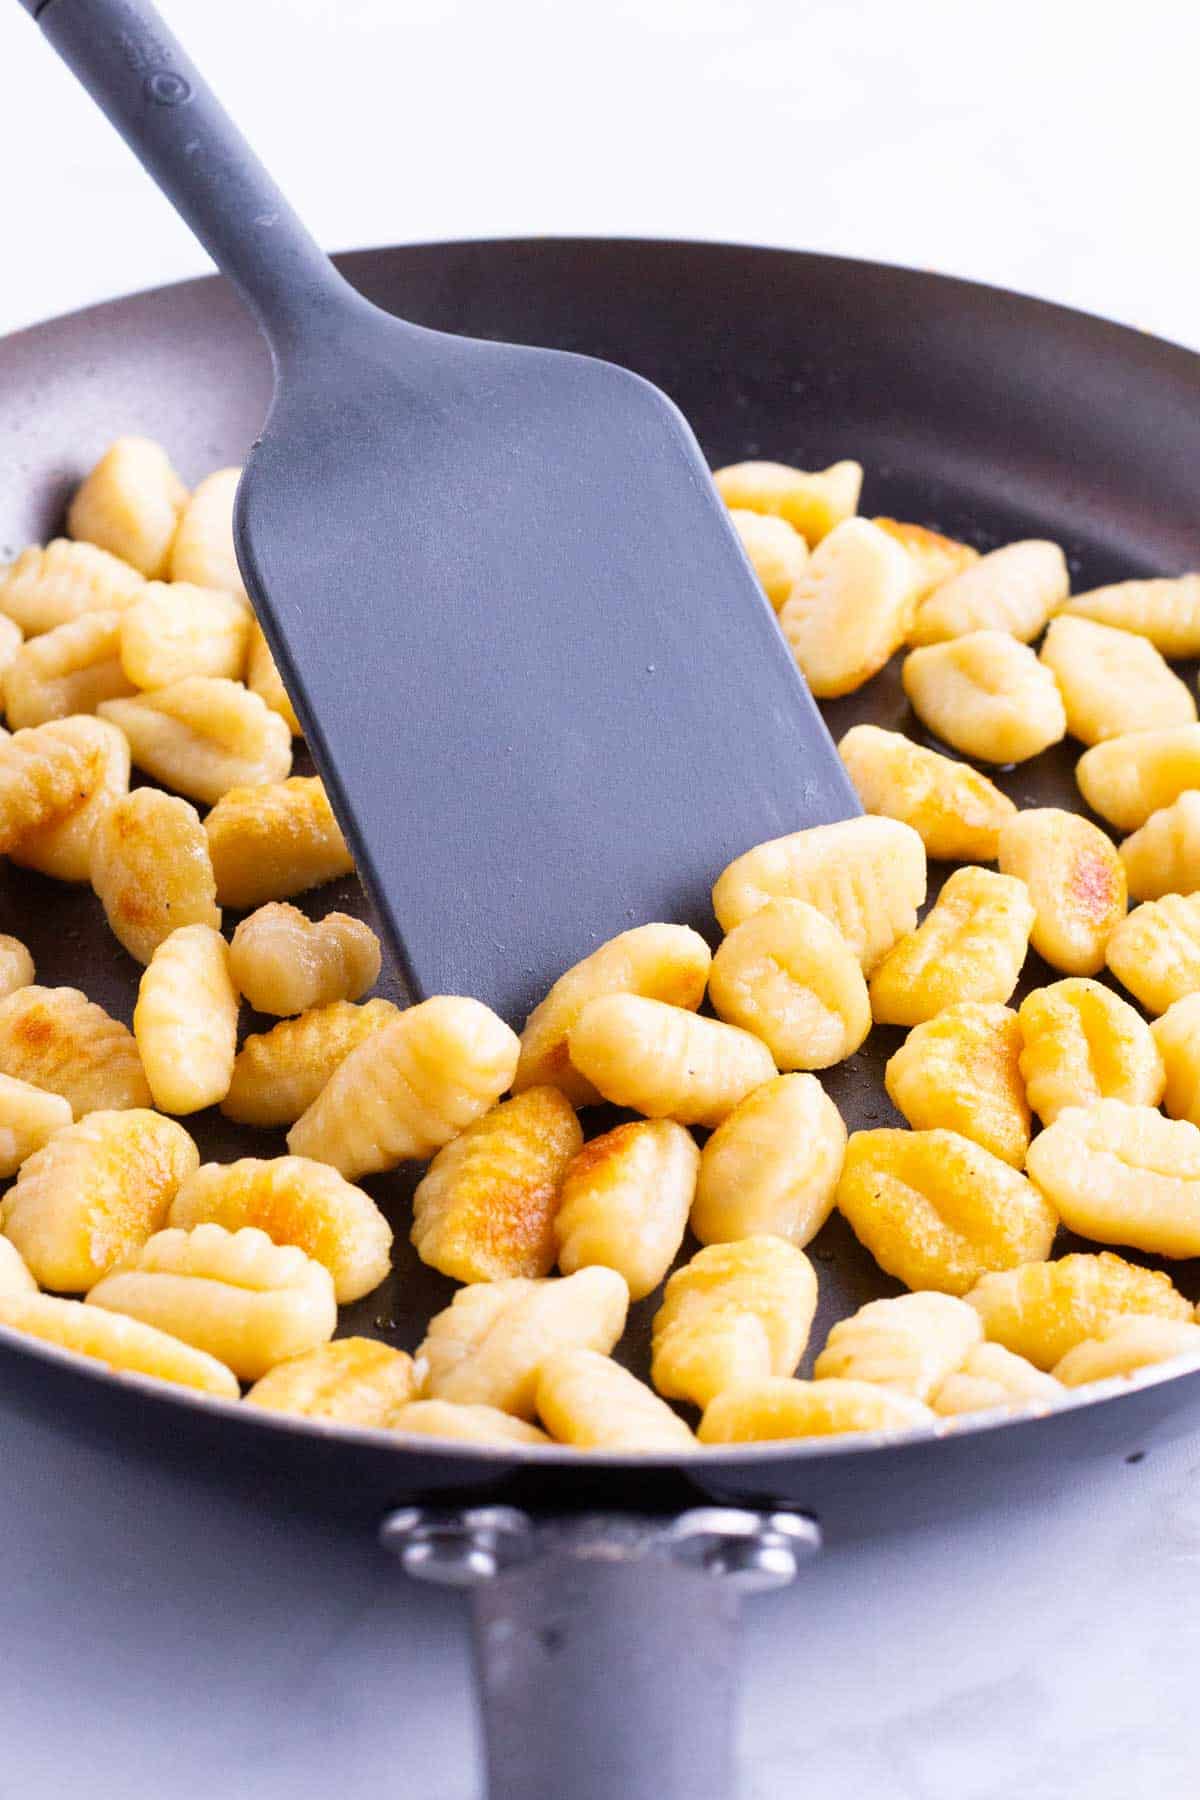 Gnocchi is cooked in a skillet.